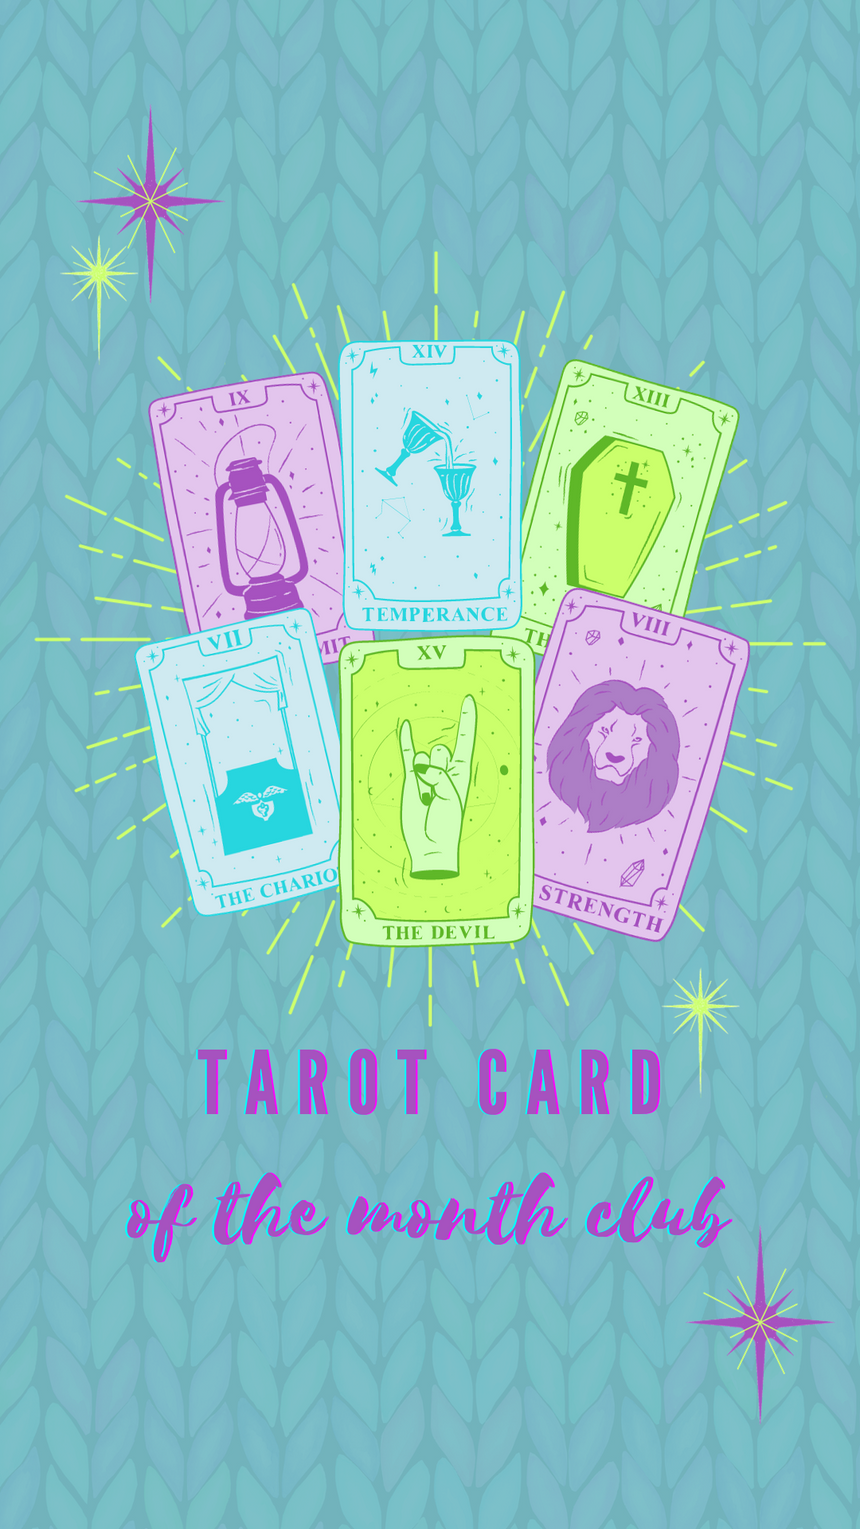 Tarot Card of the Month Club!